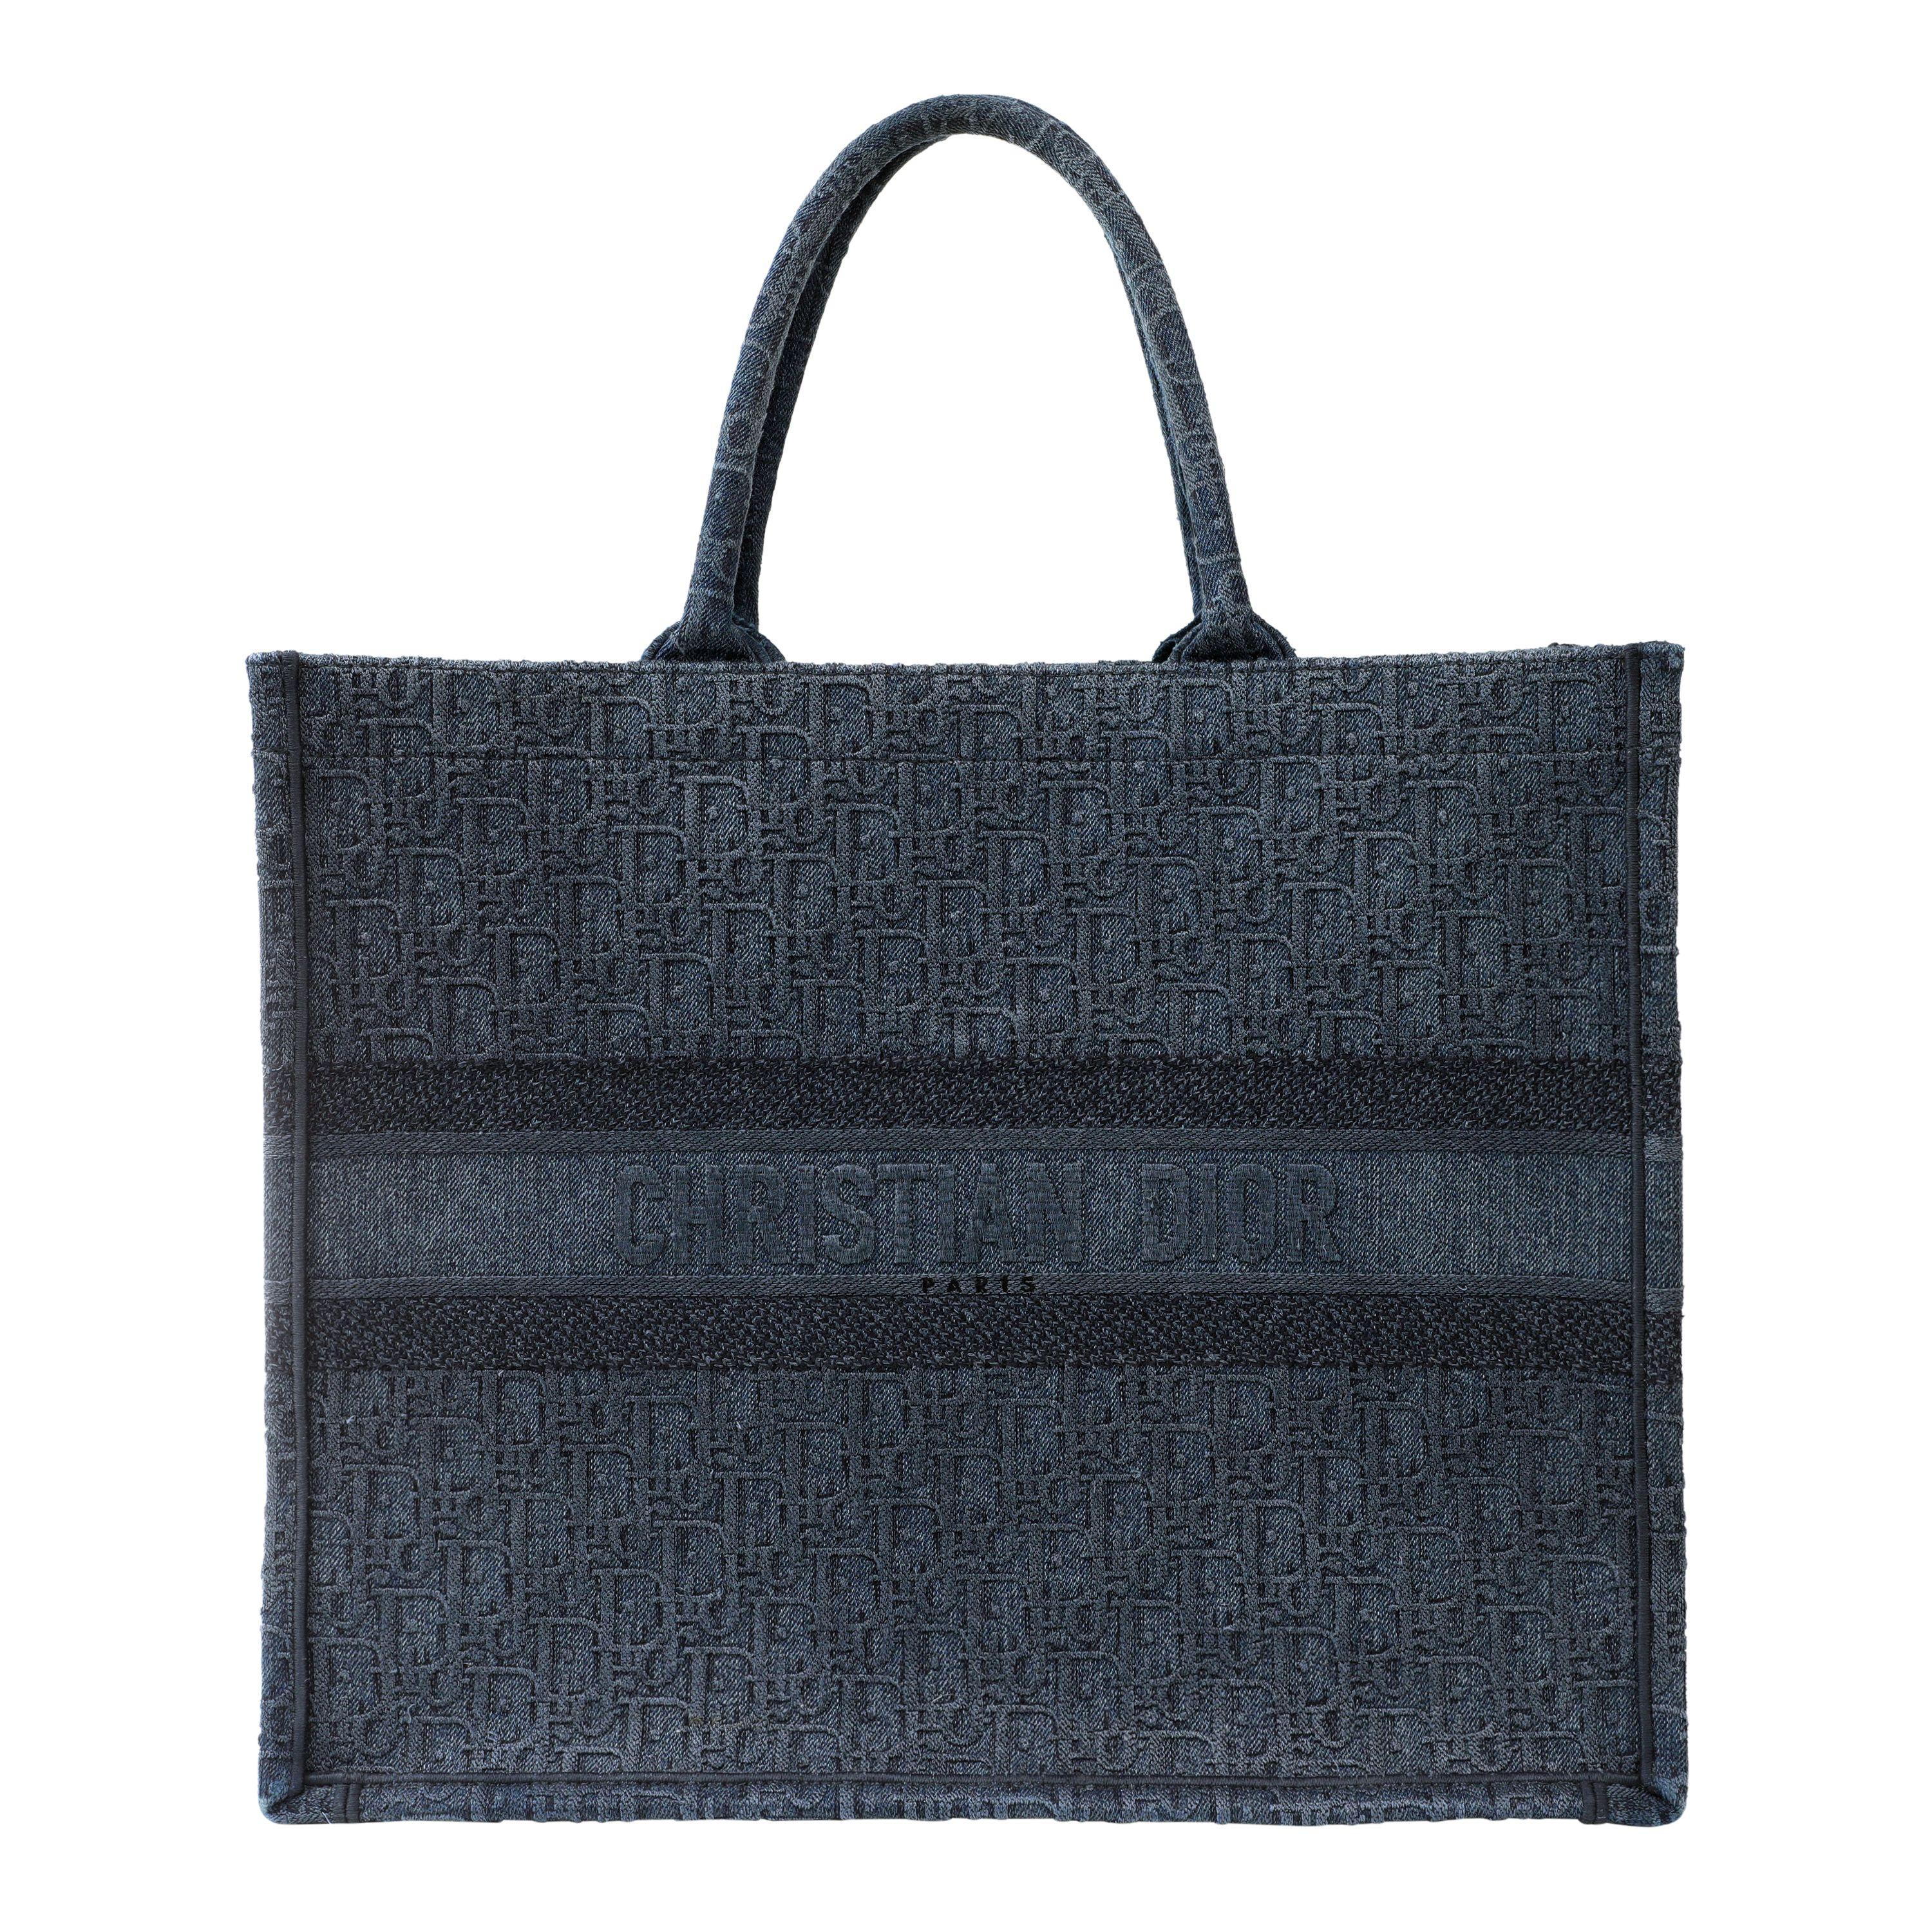 Dior Denim Oblique Large Book Tote- Pristine; appears never carried.
Dark blue denim with Dior signature Oblique pattern.  This is the large size; easily carries a fifteen inch laptop in addition to the other daily essentials.  Unlined interior. 